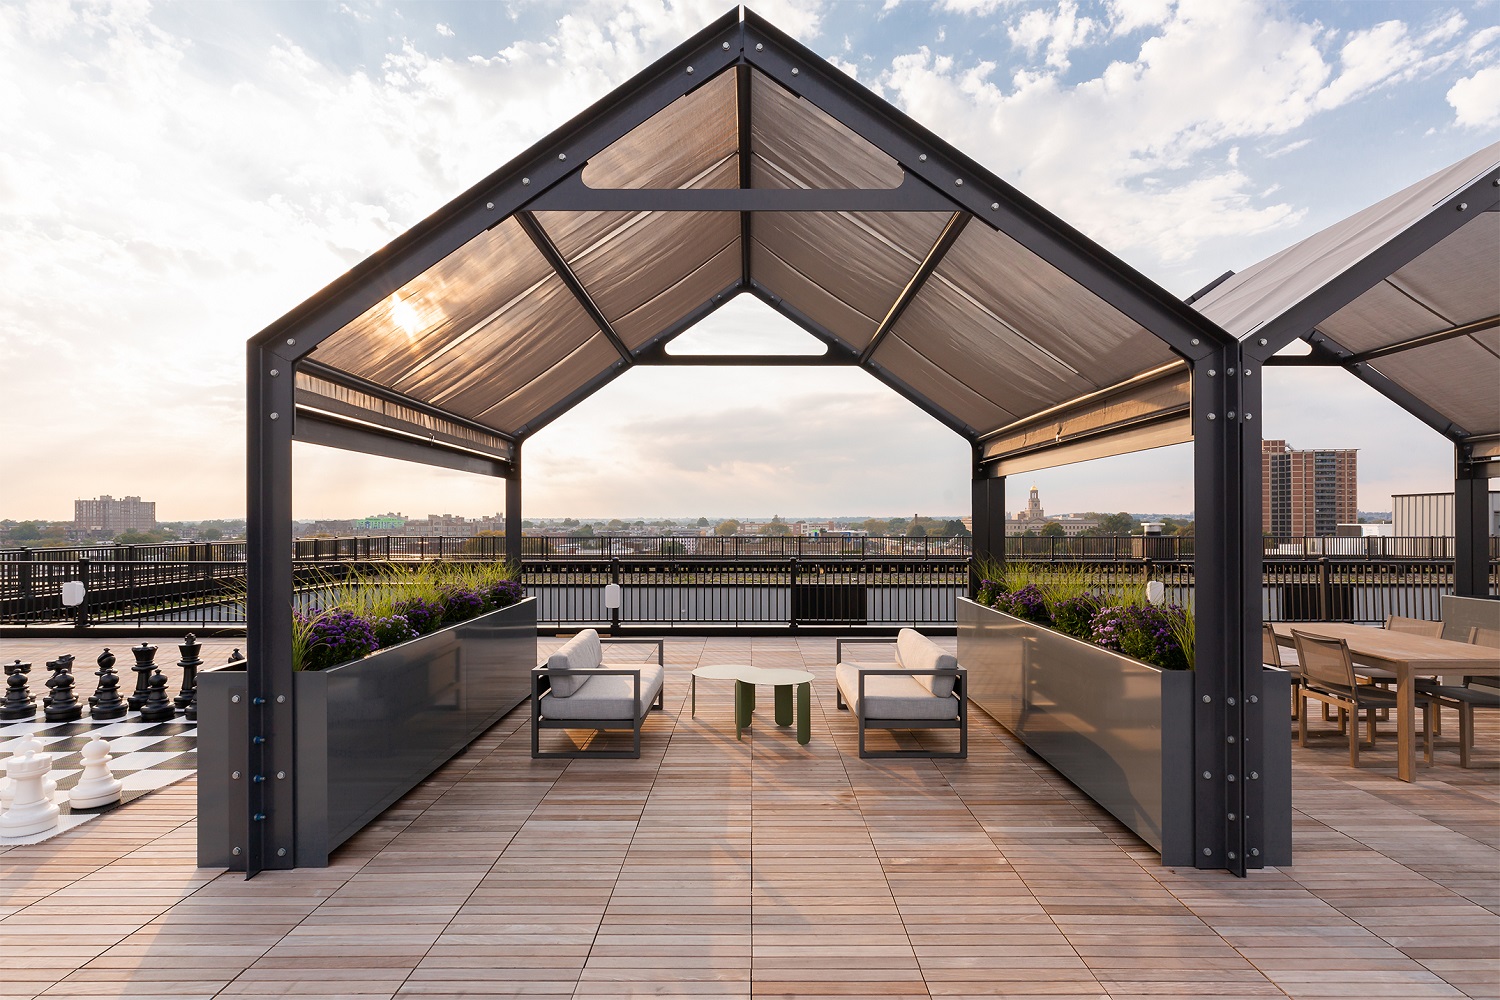 Stylish rooftop with cabana seating areas, giant chess board and views of the Philadelphia skyline.